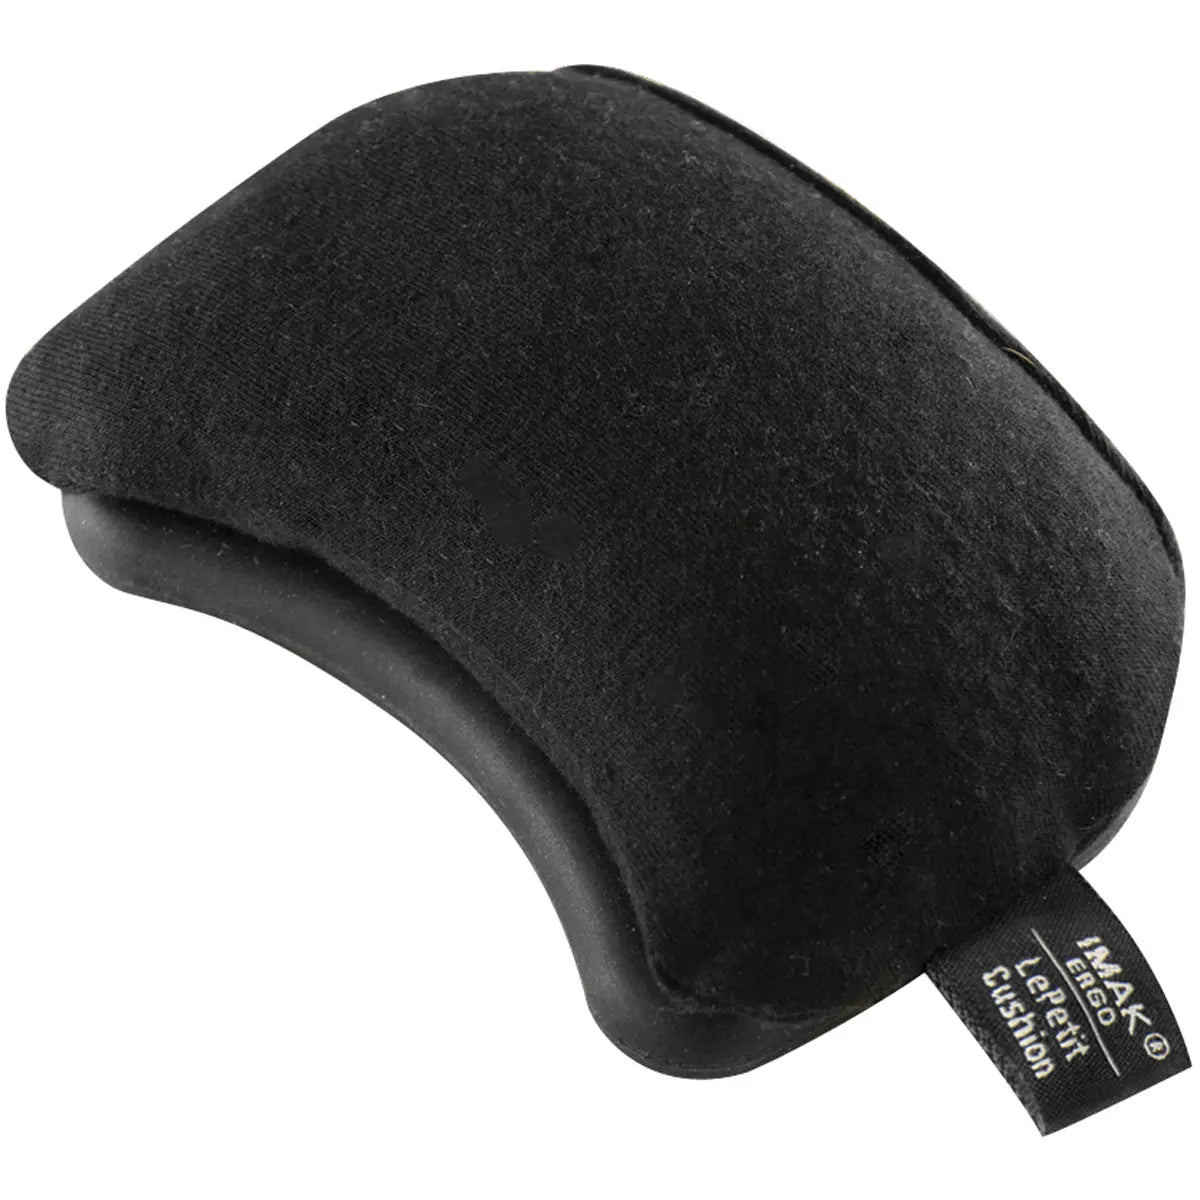 Brownmed IMAK Ergo Glider with Mouse Cushion - Black IMAK